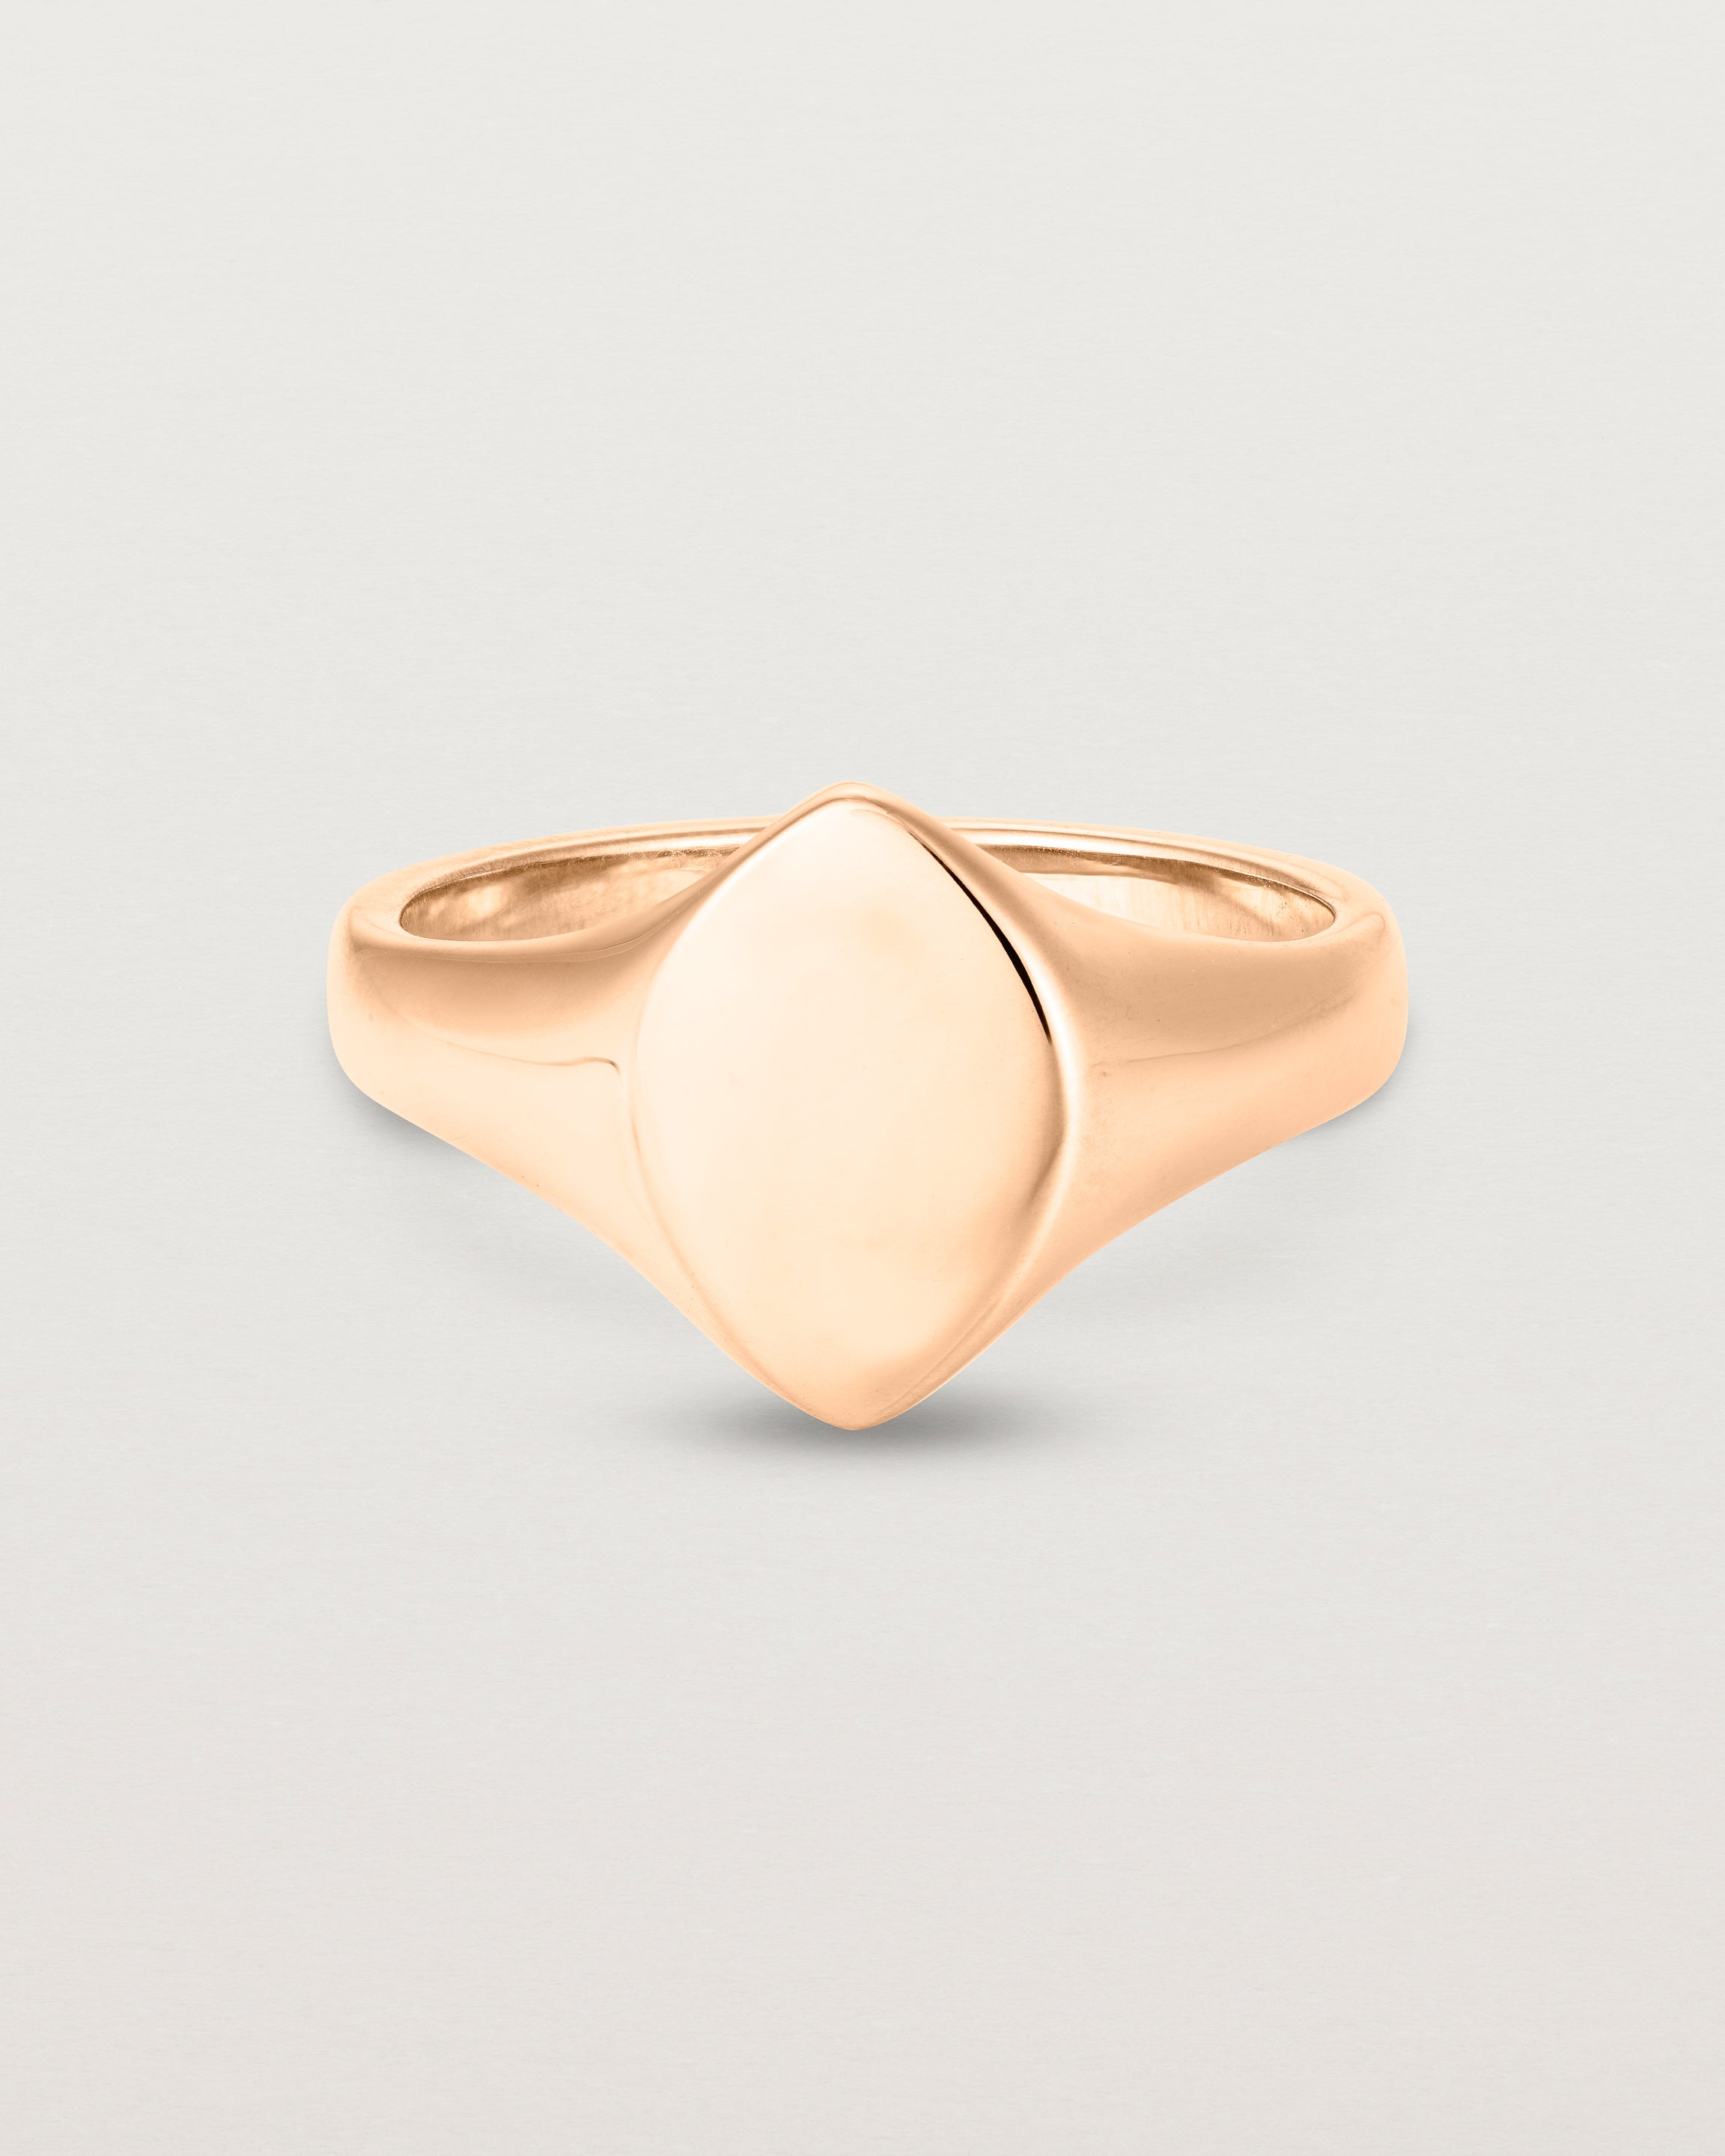 Front view of the Willow Signet Ring in rose gold.